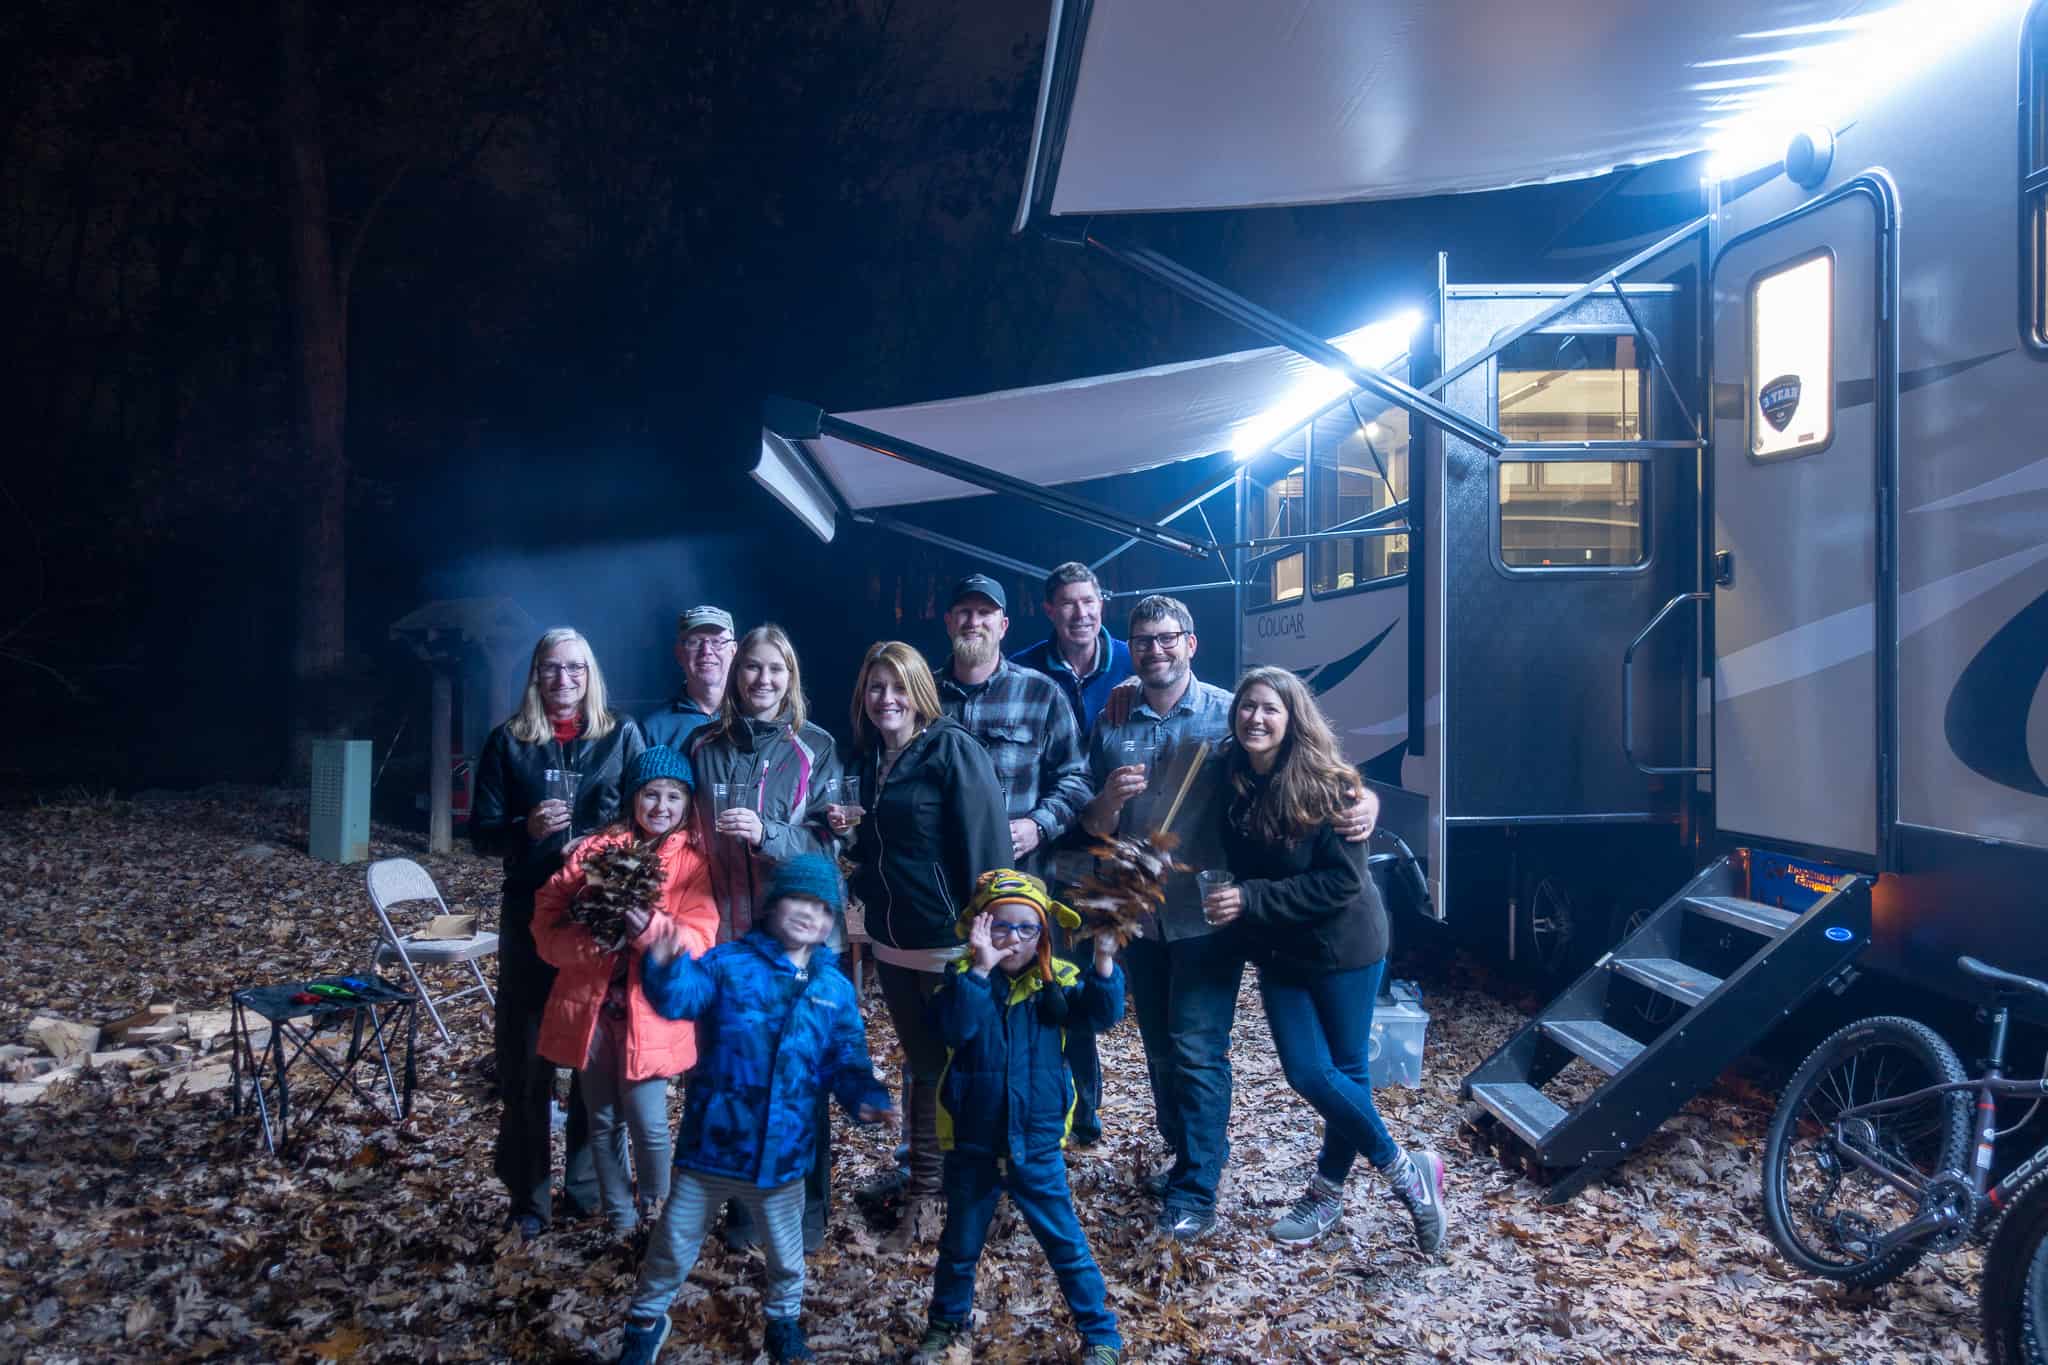 Taking a family photo with our RV at Jellystone